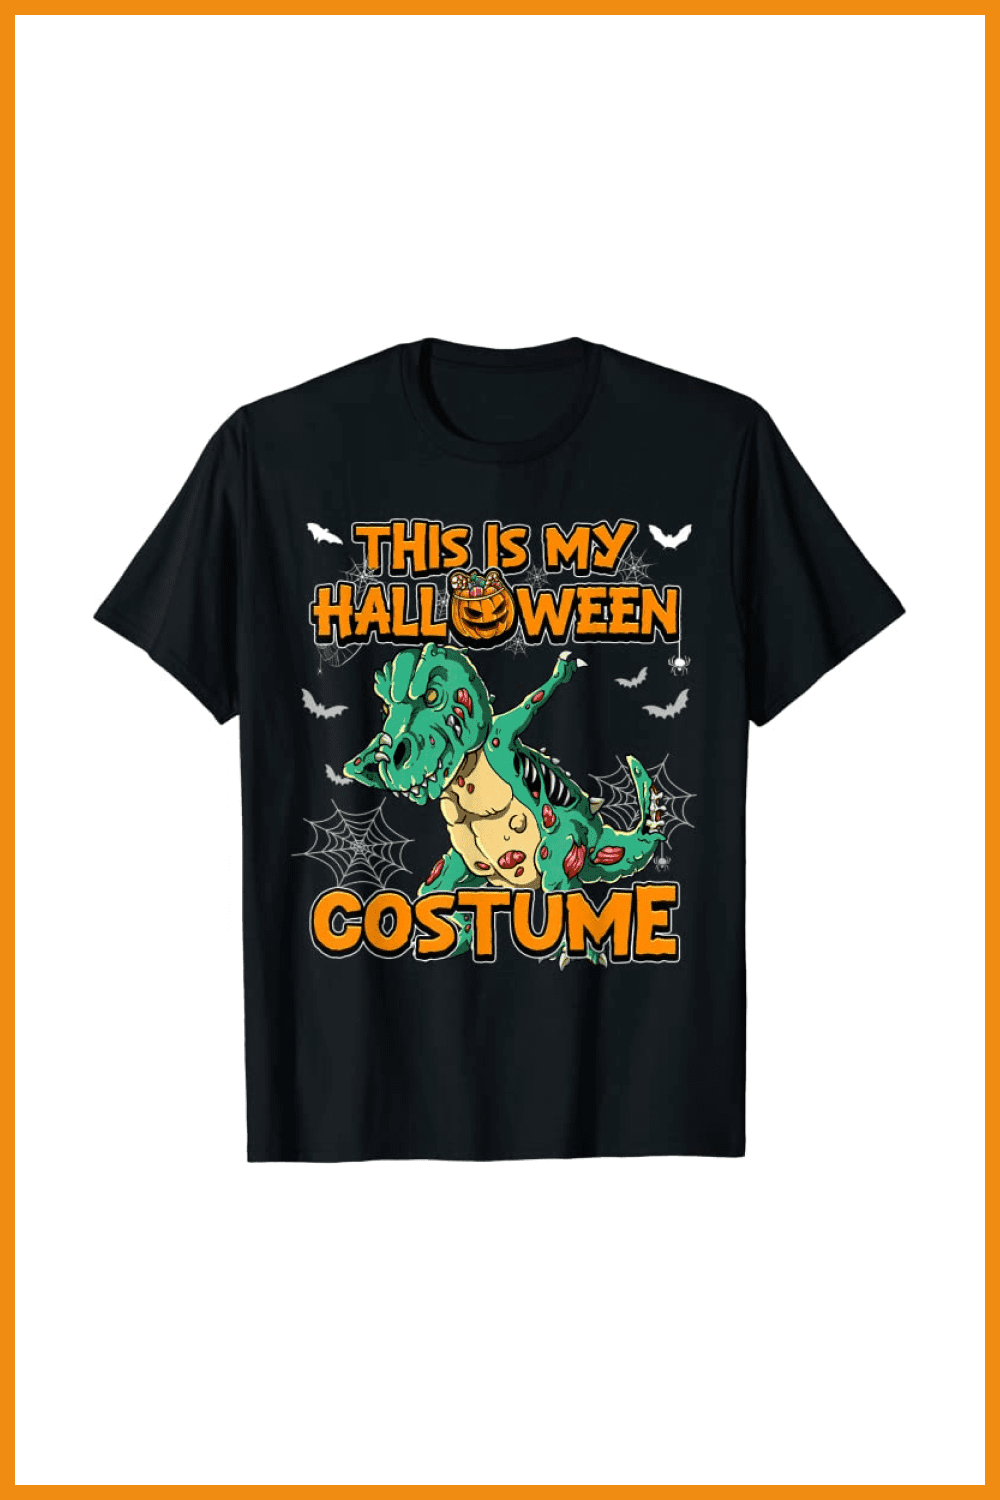 Black T-shirt with an evil green tyrannosaurus rex and orange lettering.